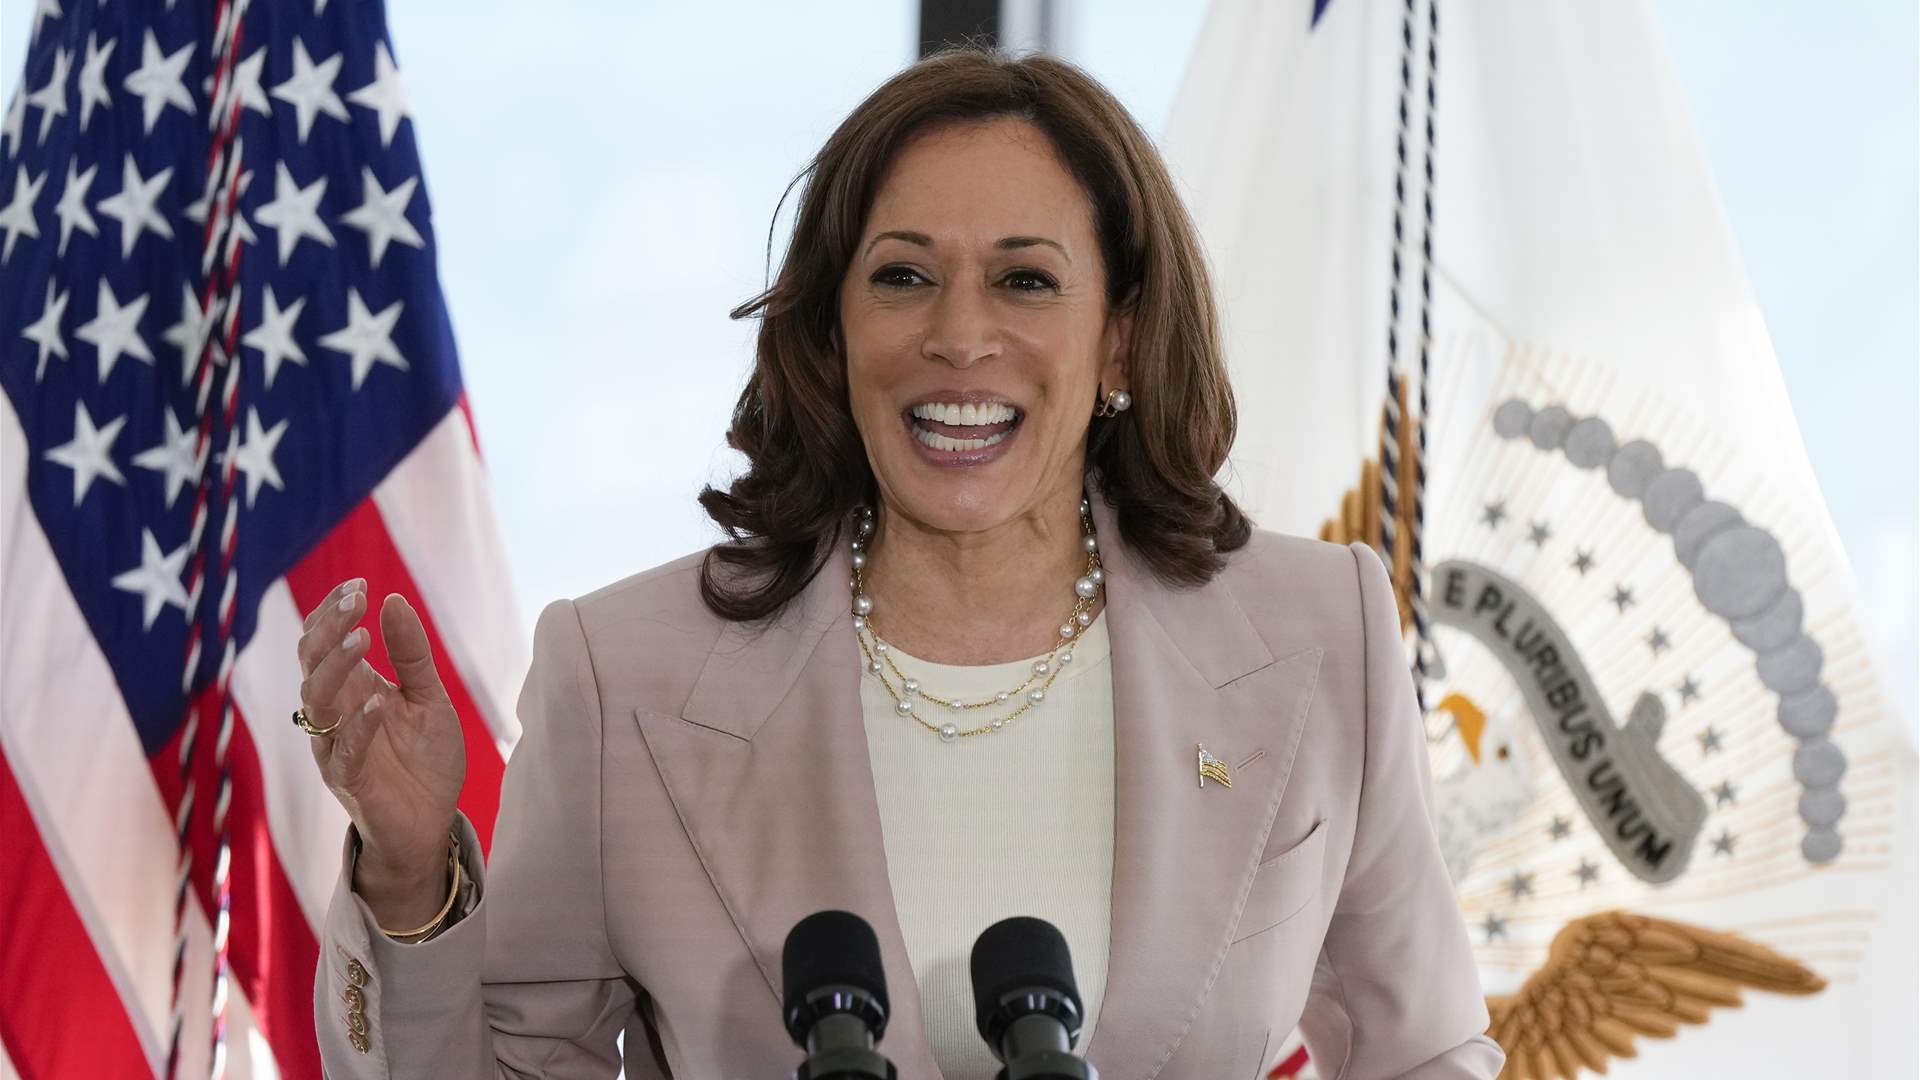 Kamala Harris seeks to attract young Americans voters